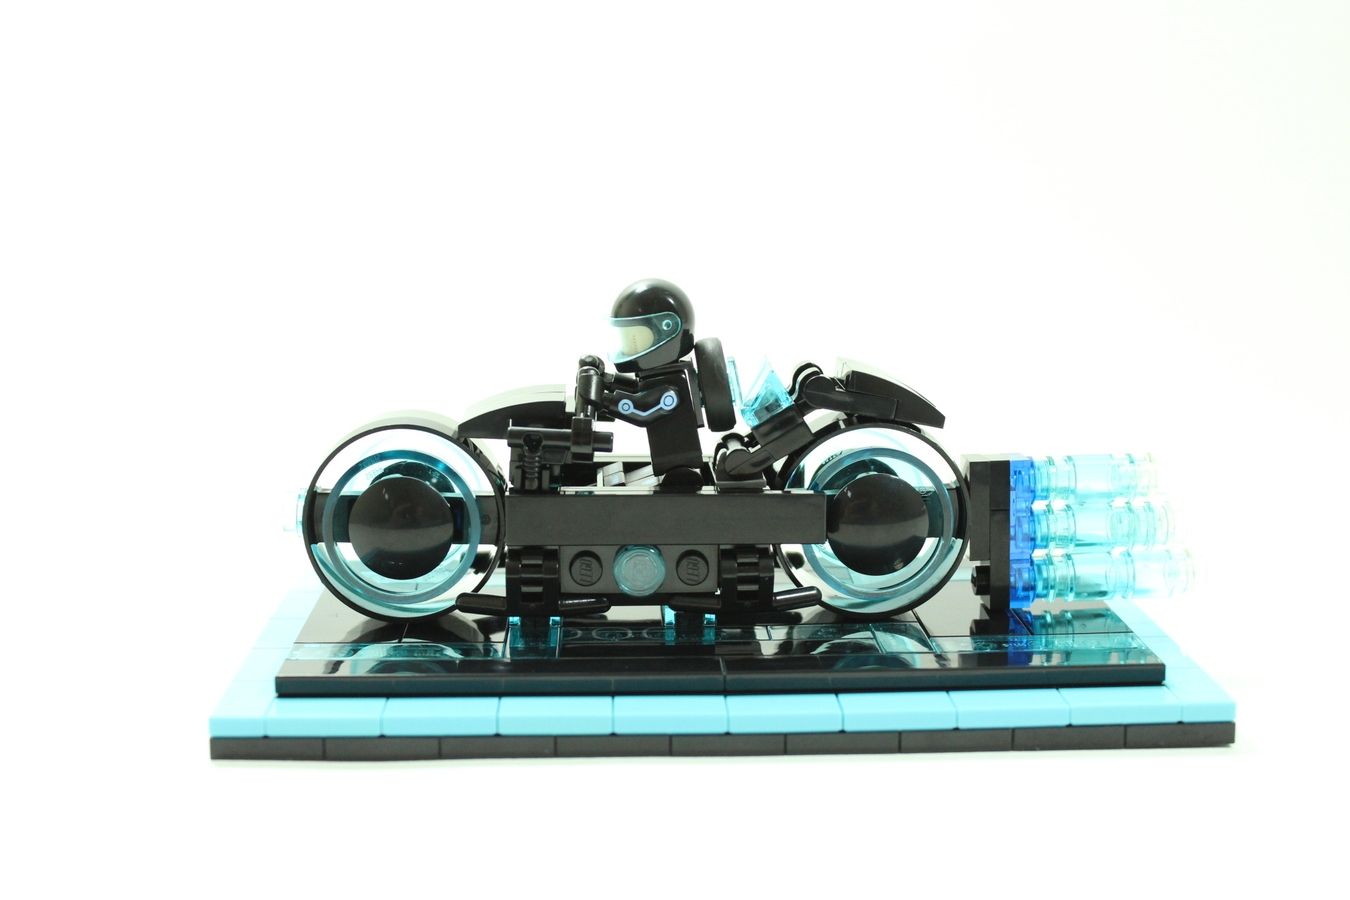 2018 LEGO might end up making a full scale model of the TRON Light Cycle